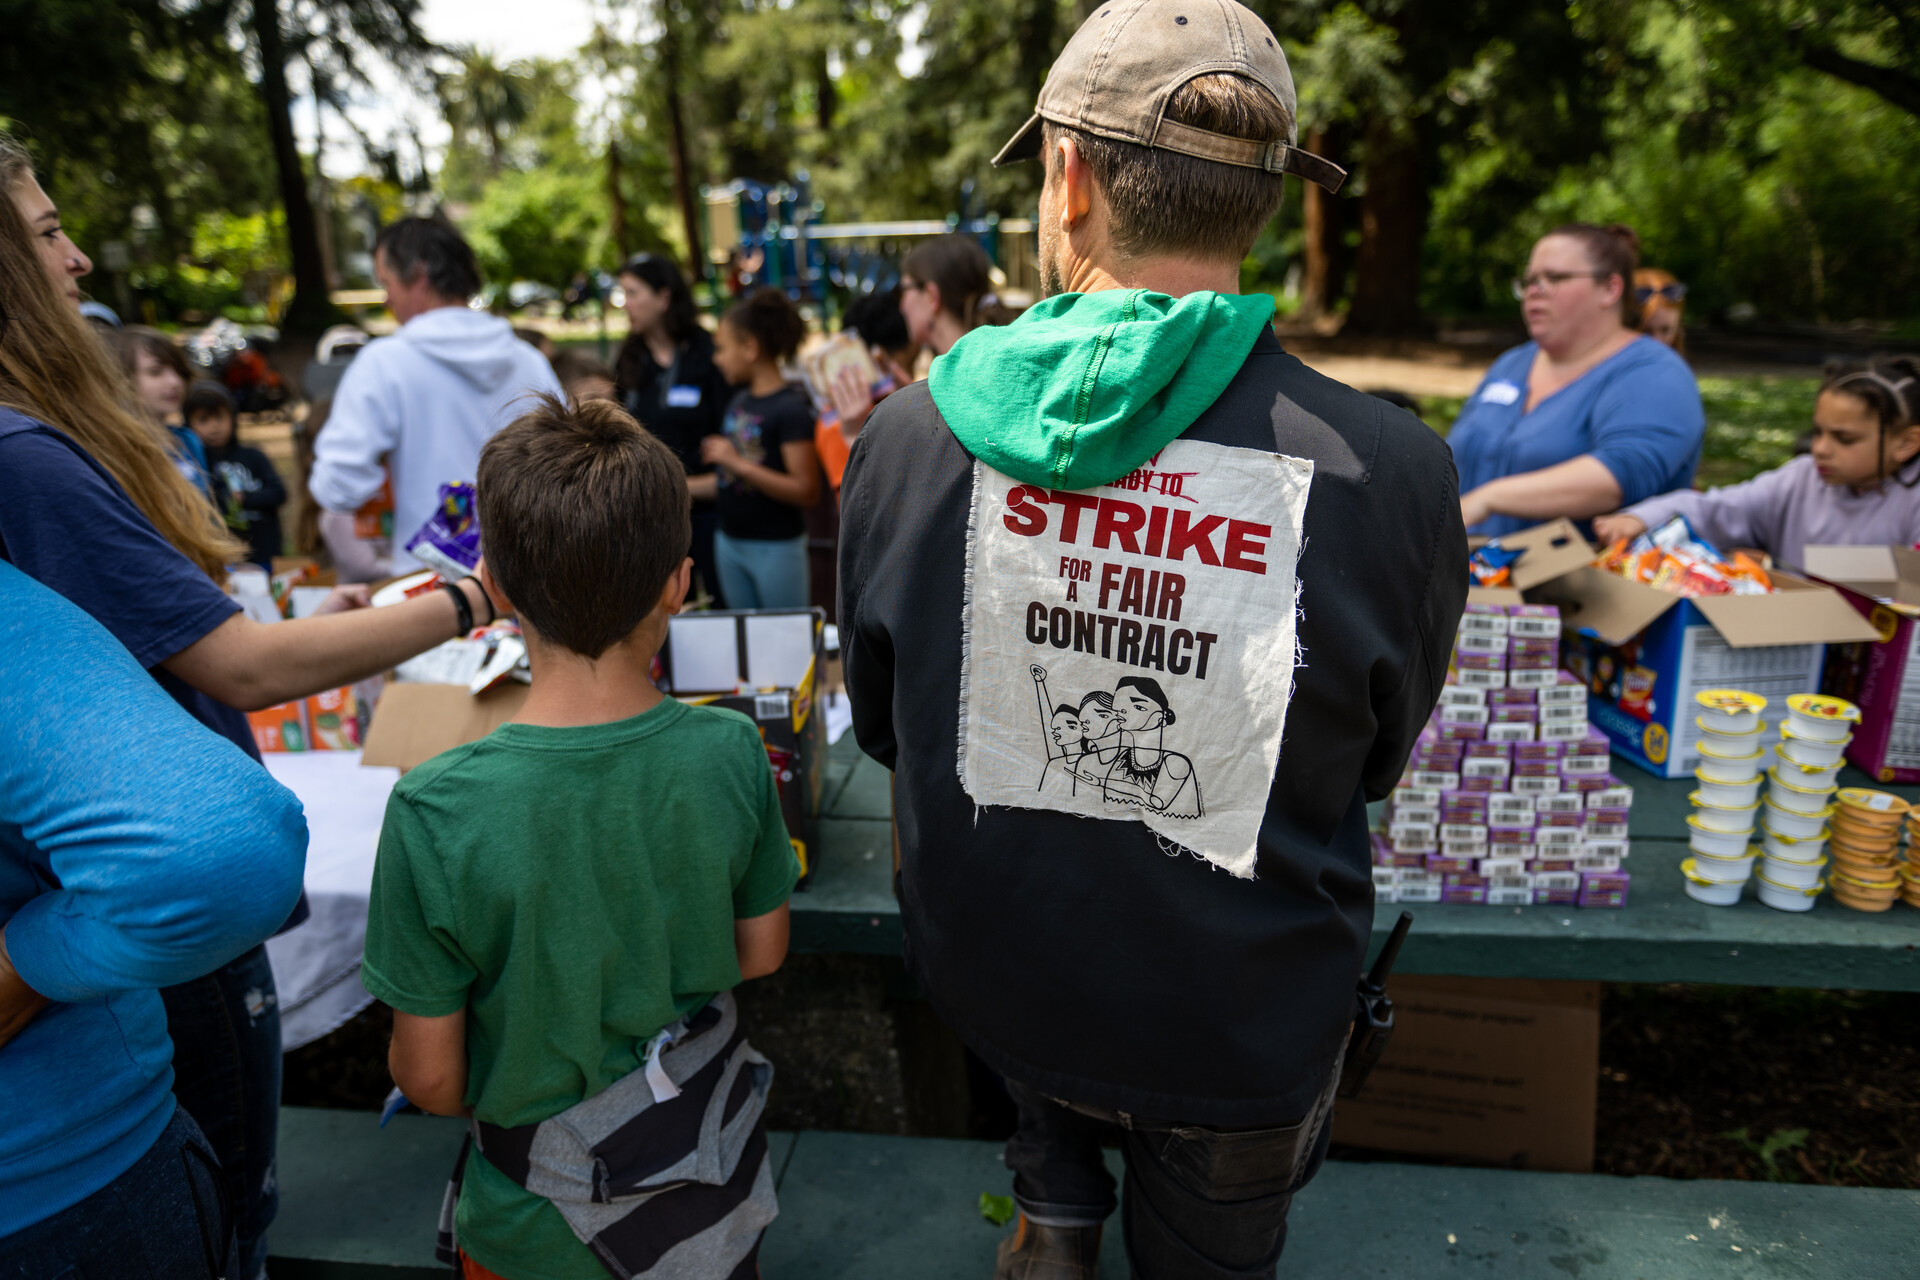 A little boy in a green T-shirt and a striped sweater wrapped around his wait stands next to a man with a black hoodie on with a back patch that reads, "Strike for a fair contract." Both of their backs face the camera. The two are standing at a picnic bench with neat stacks of juice boxes and snacks for kids.